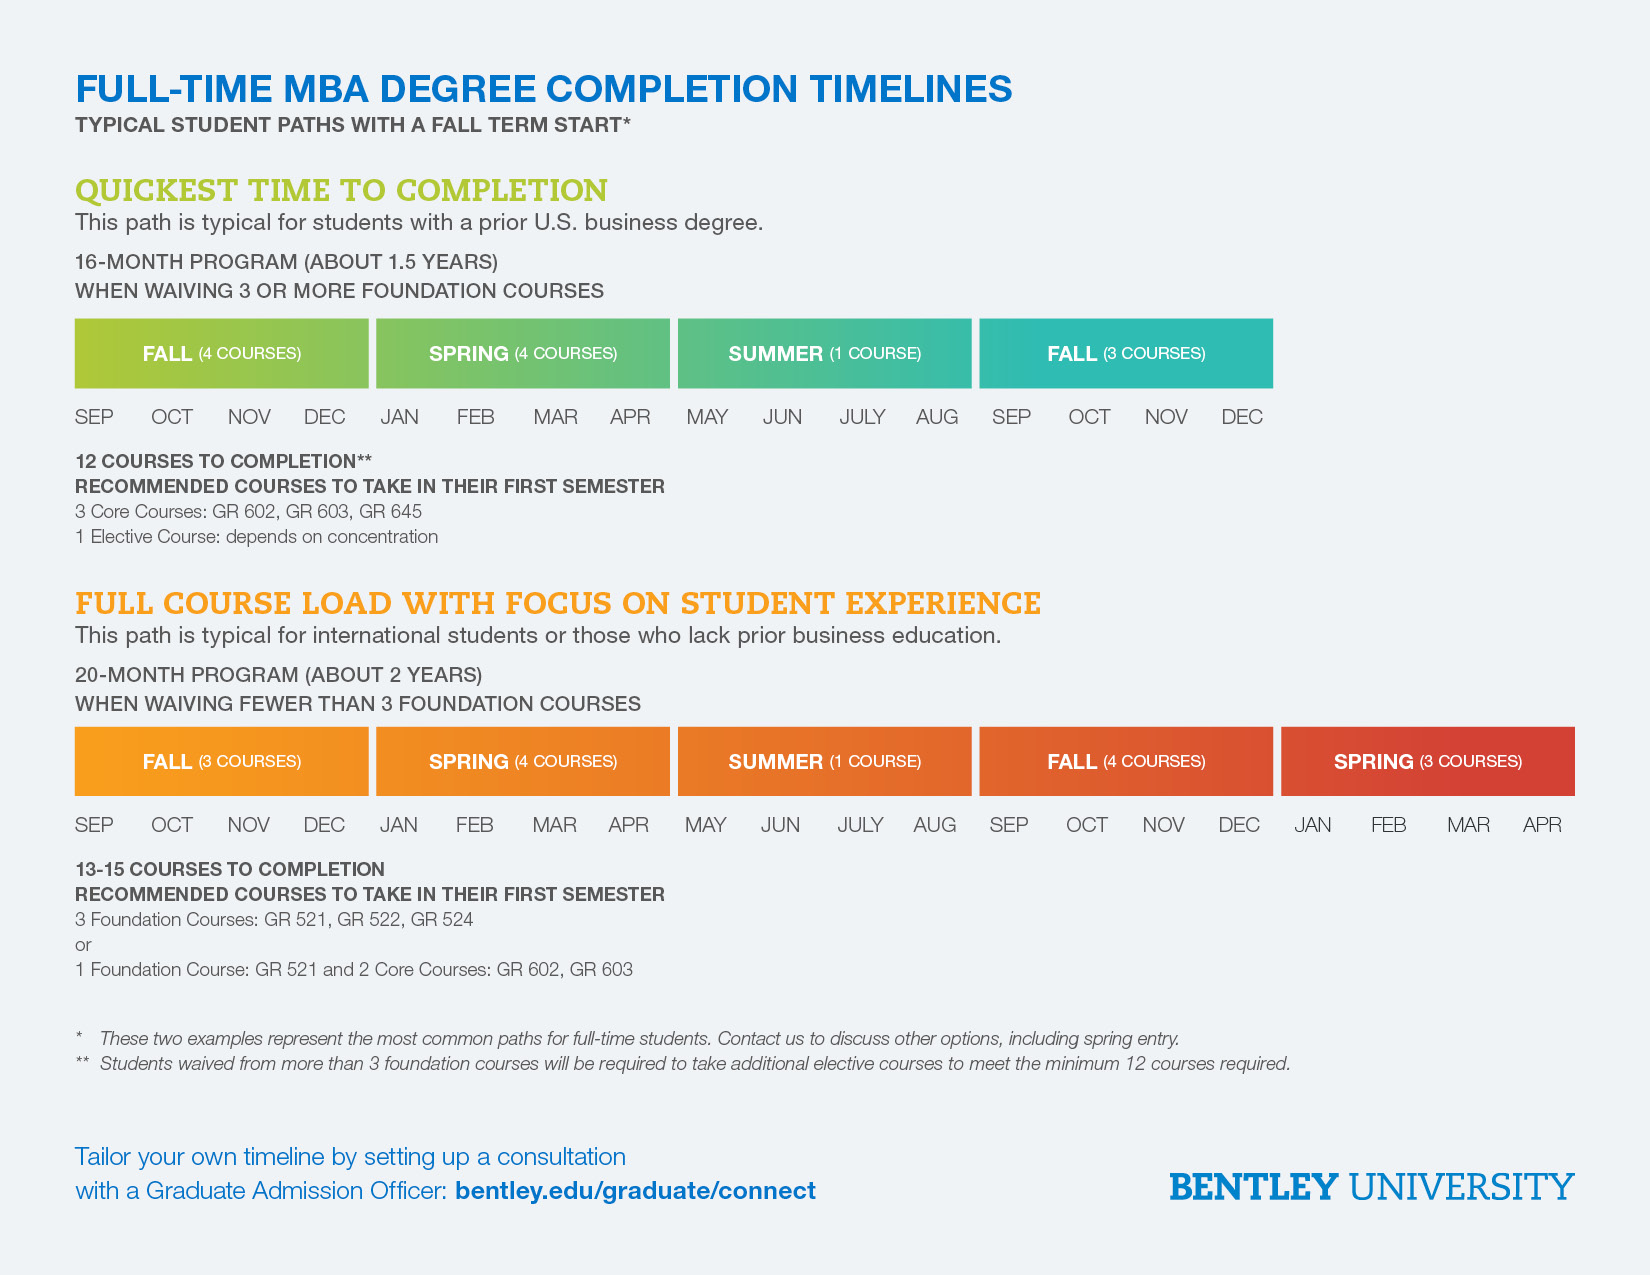 Image showing typical times to completion for students